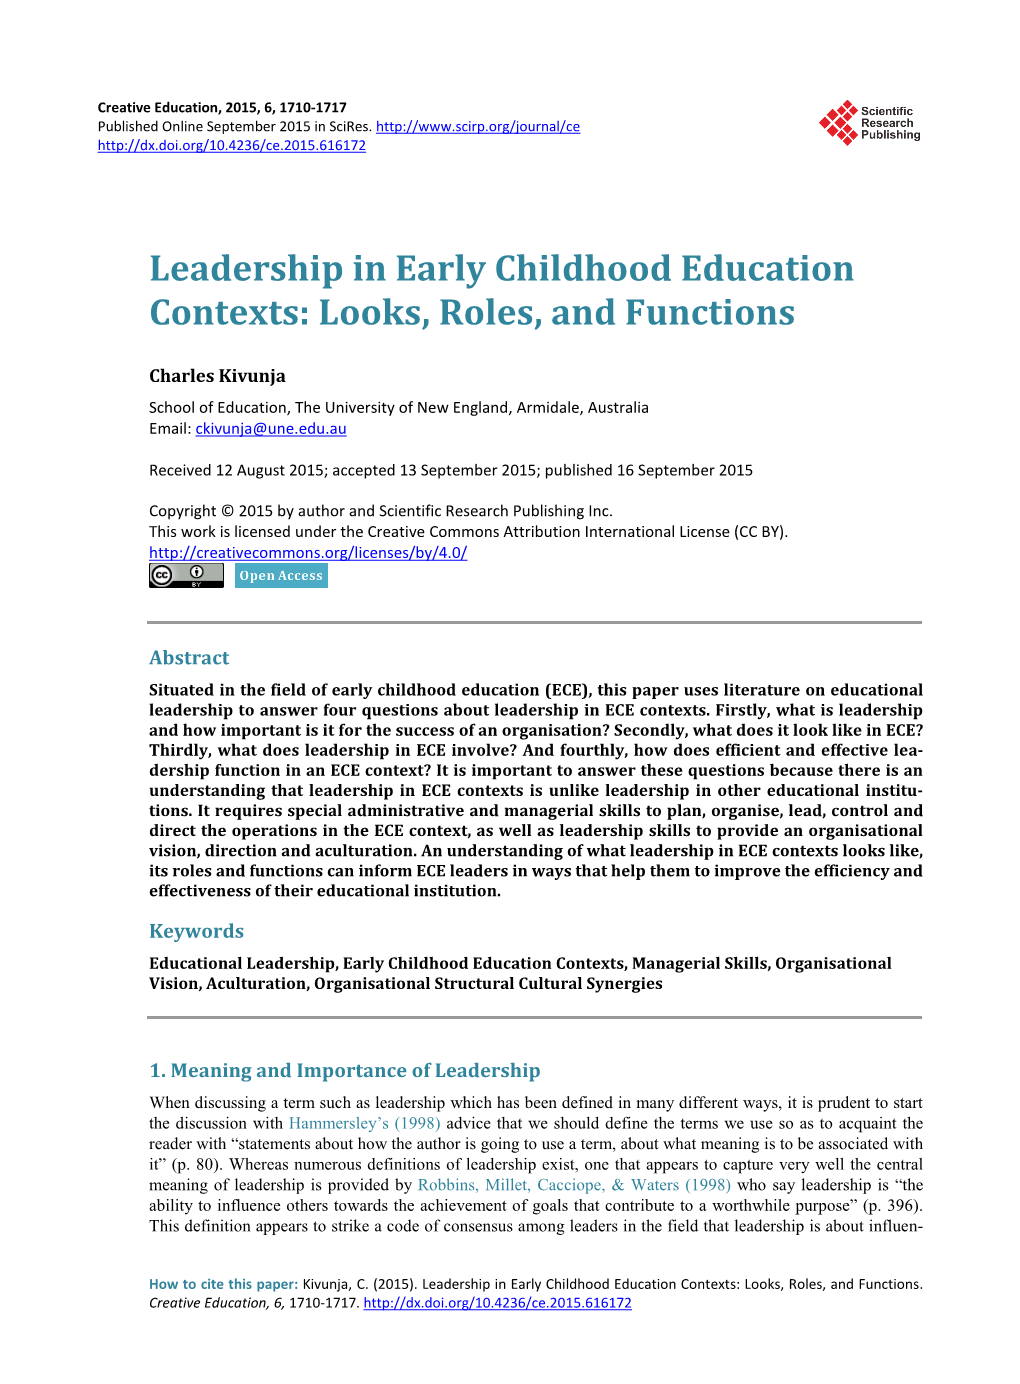 Leadership in Early Childhood Education Contexts: Looks, Roles, and Functions